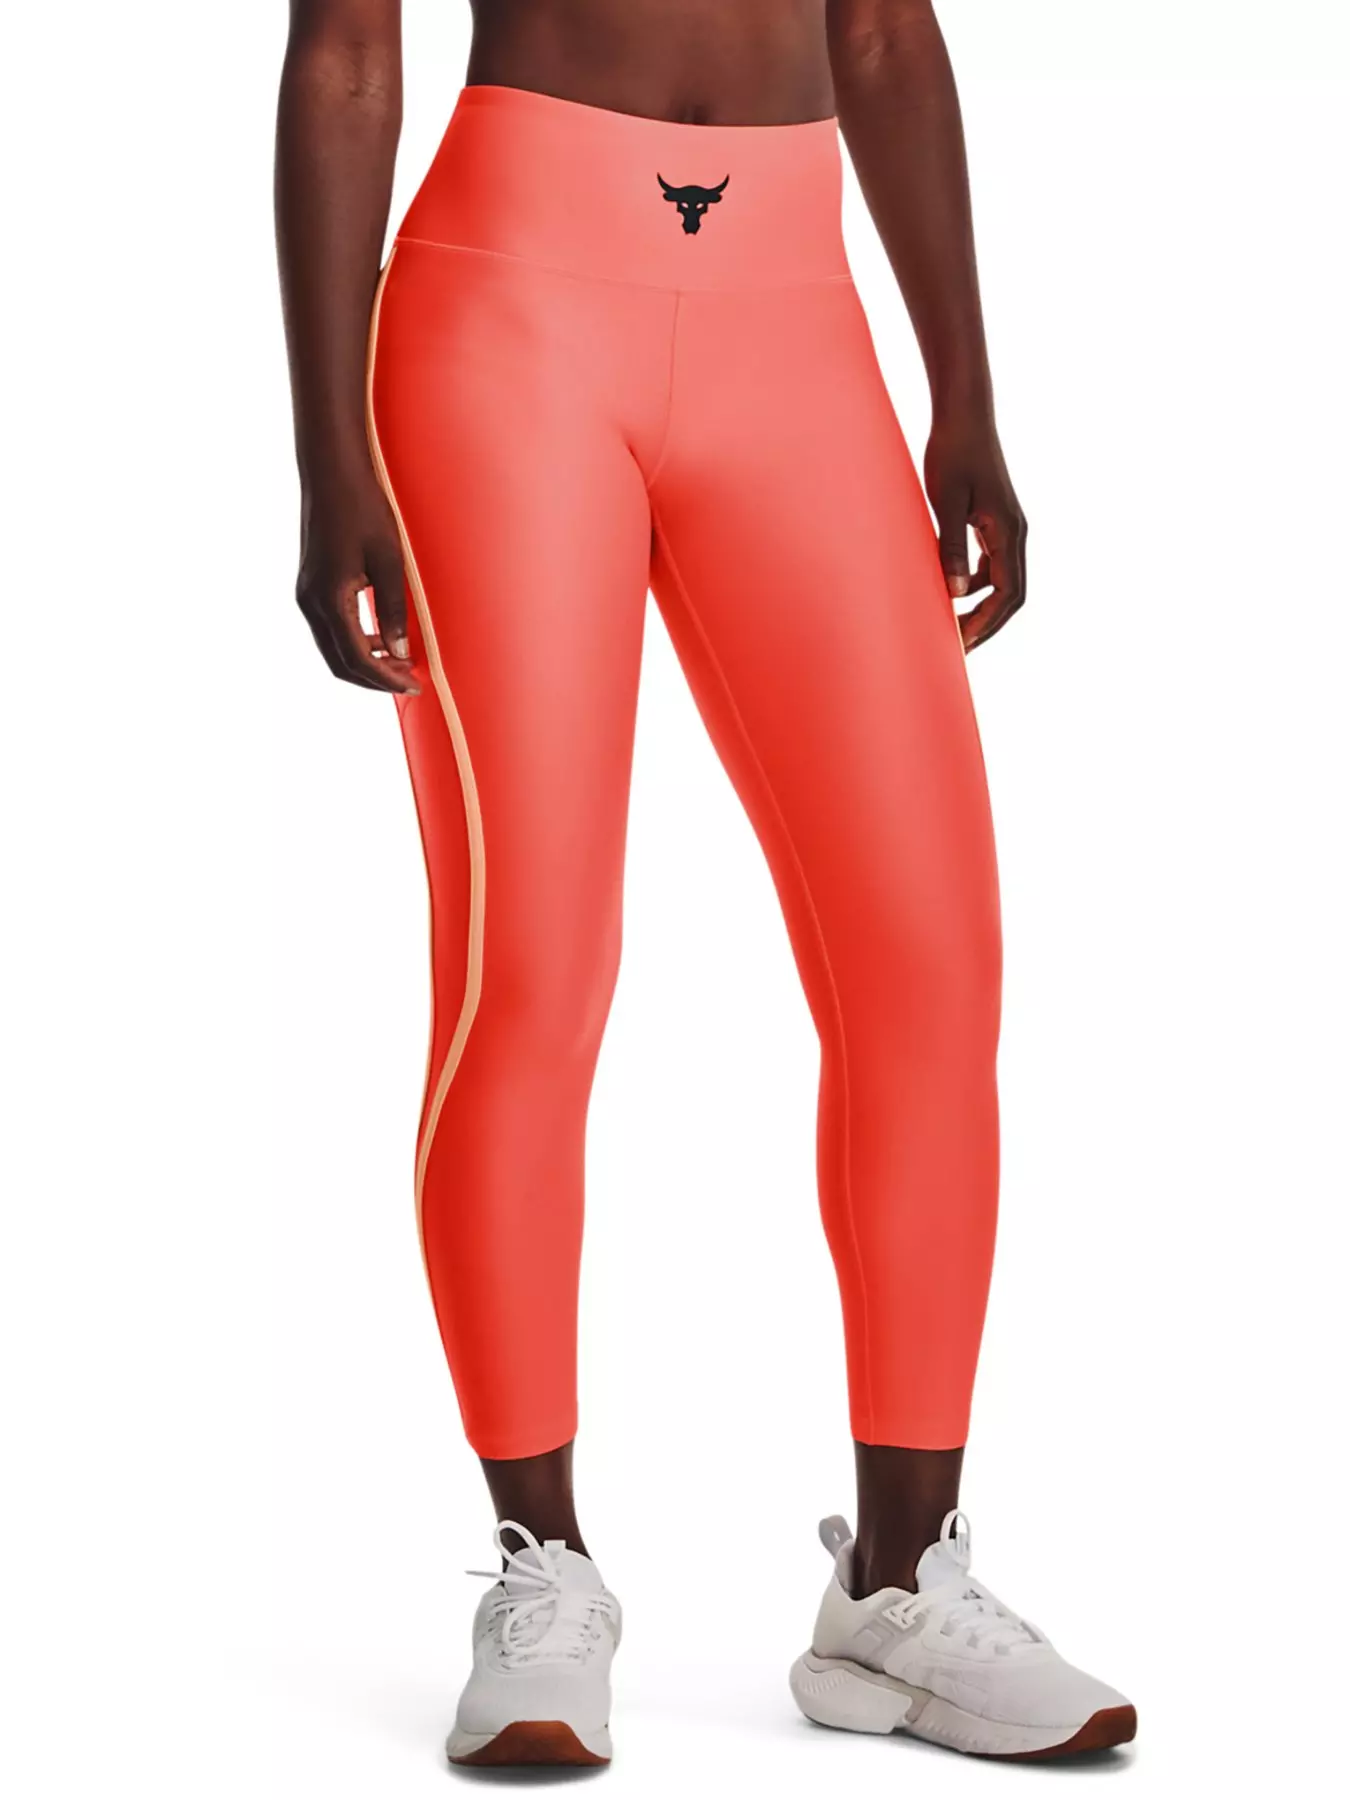 Free People High-Rise 7/8 Length Good Karma Leggings in Neon Coral, $78, 11  Pairs of Neon Leggings That Are Totally Wearable (We Promise) - (Page 3)